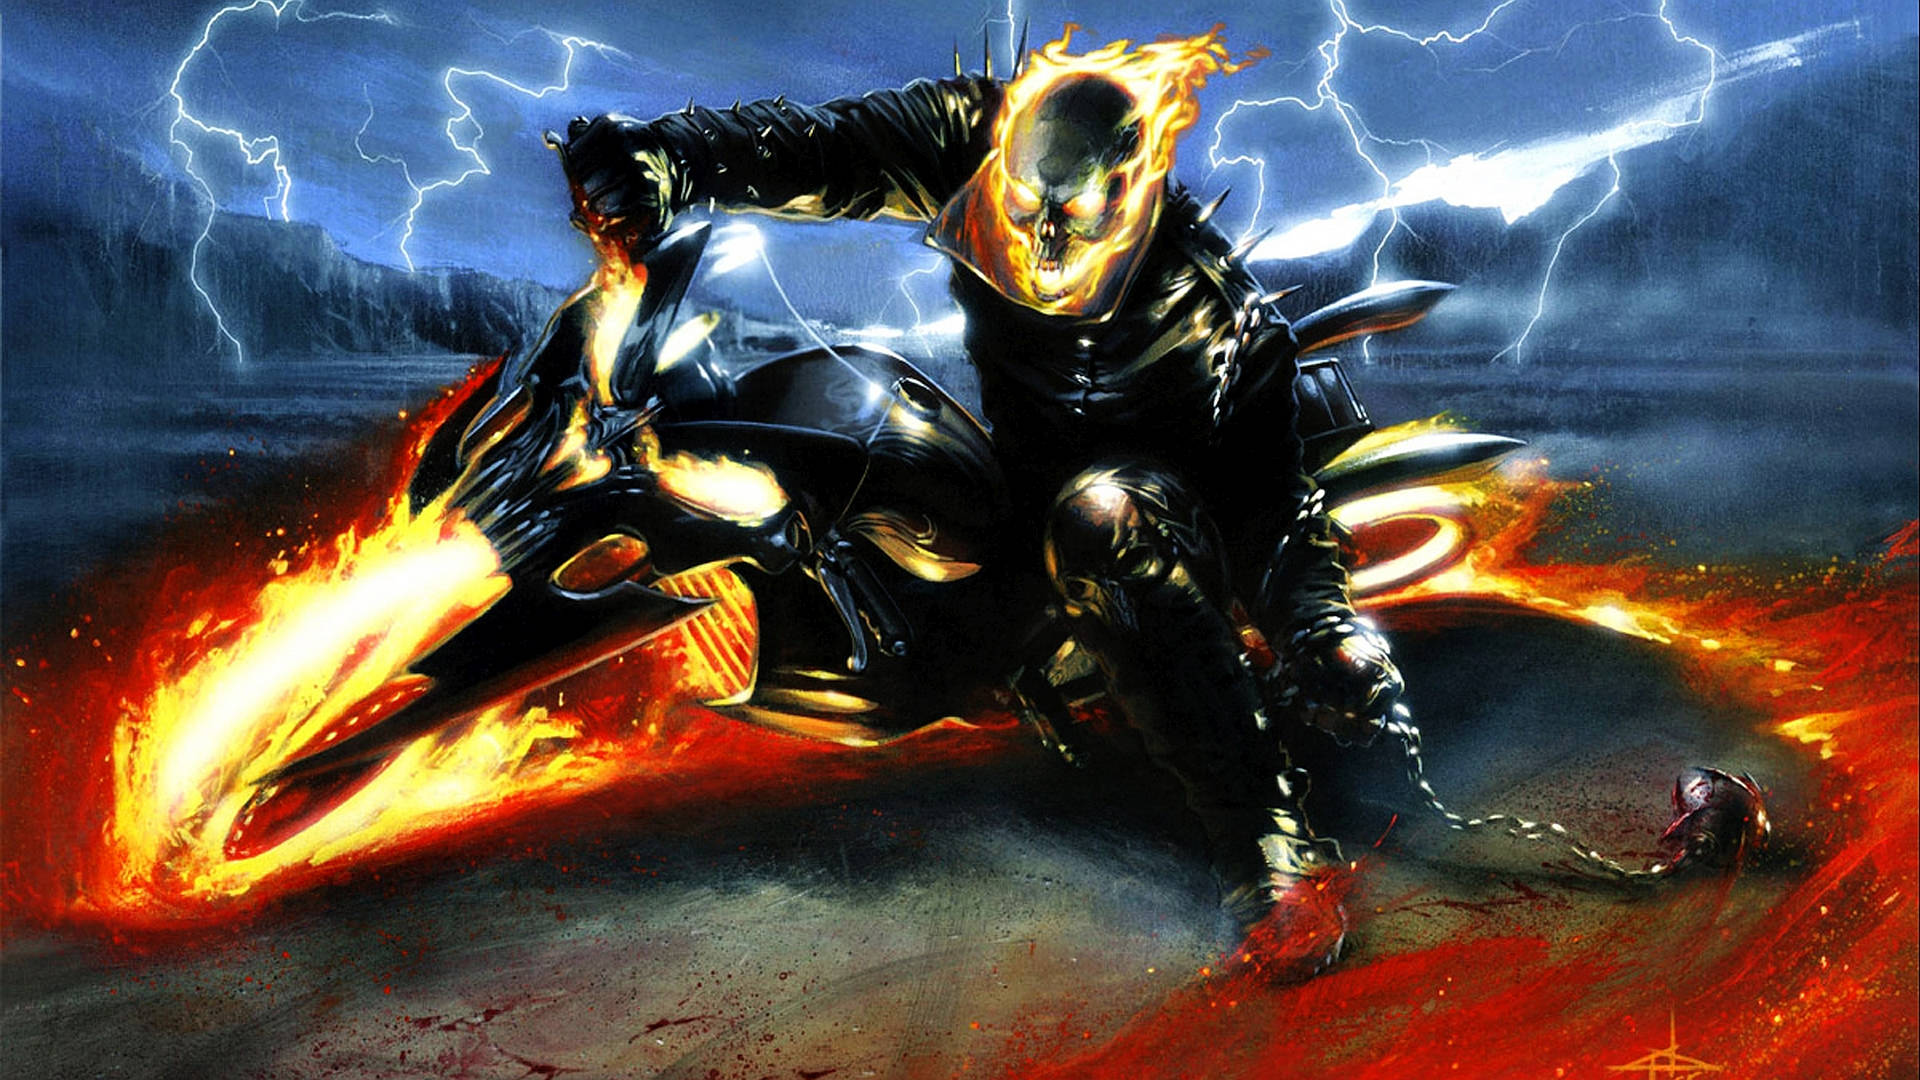 Easy Rider Motorbike With Flame Wallpaper